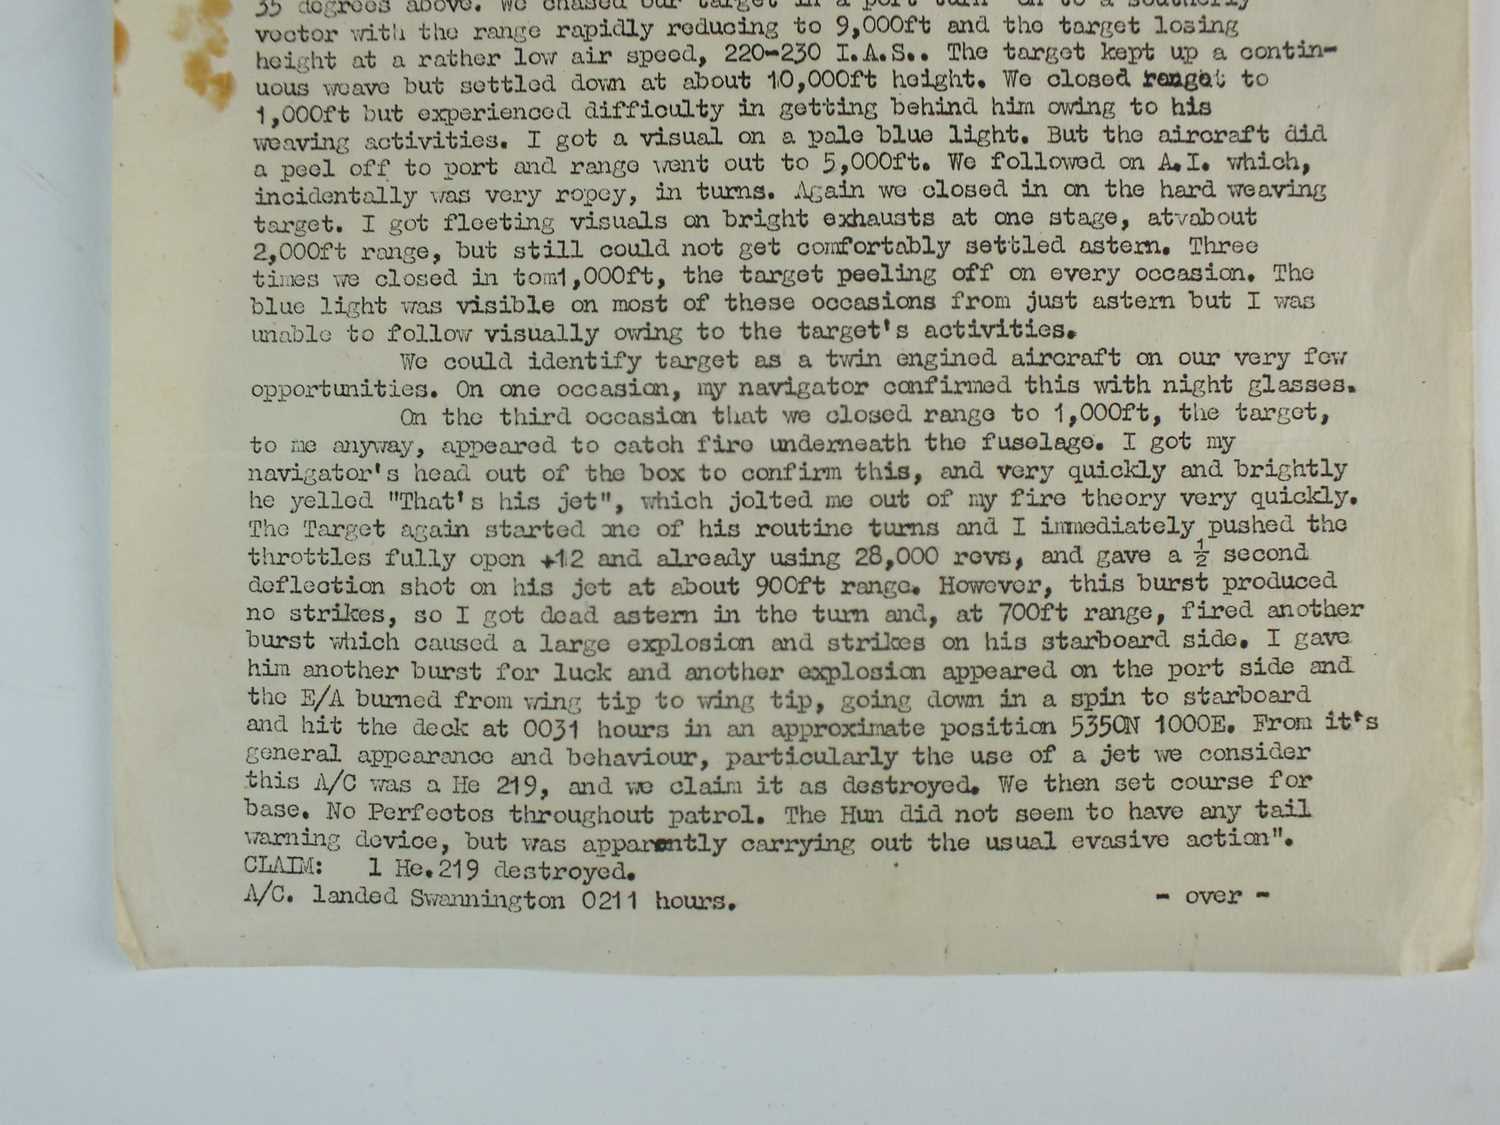 WW2 - RAF Intruder Personal Combat Report - Downed He 219 aircraft - Image 3 of 7